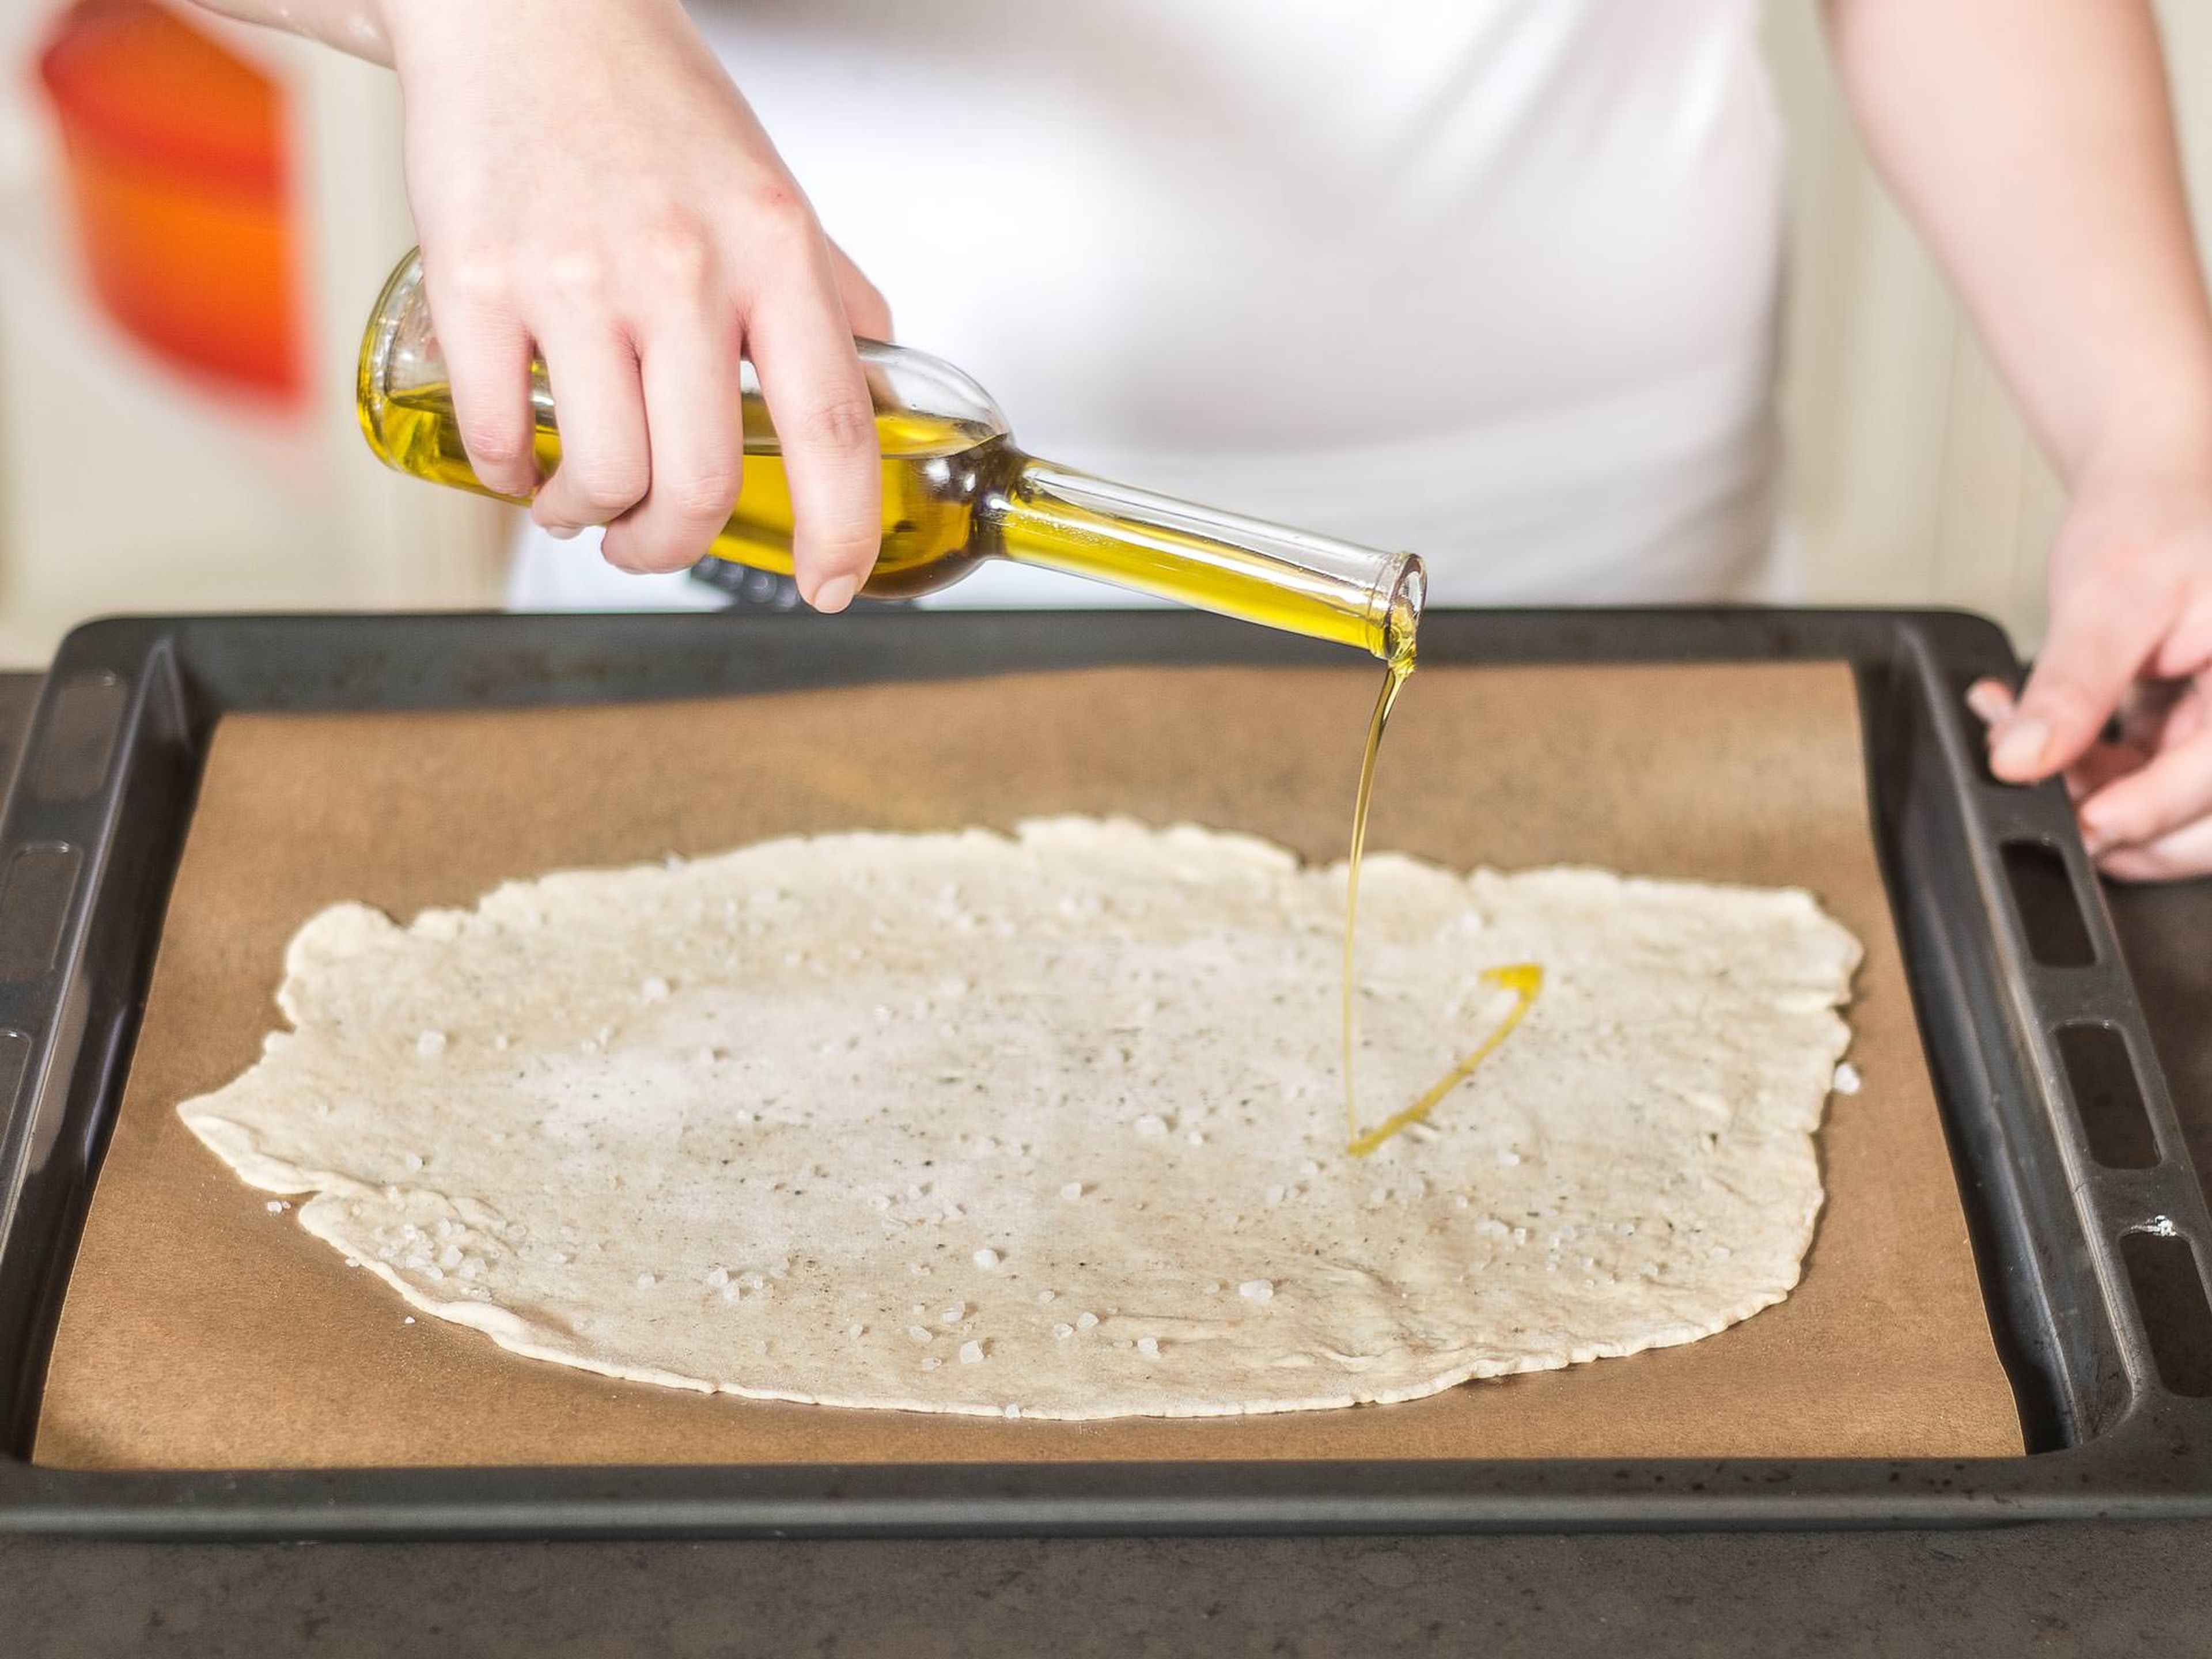 Transfer the flattened dough to a lined baking tray and sprinkle with red pepper and salt to taste. Drizzle with approx. 2 - 3 tbsp olive oil.